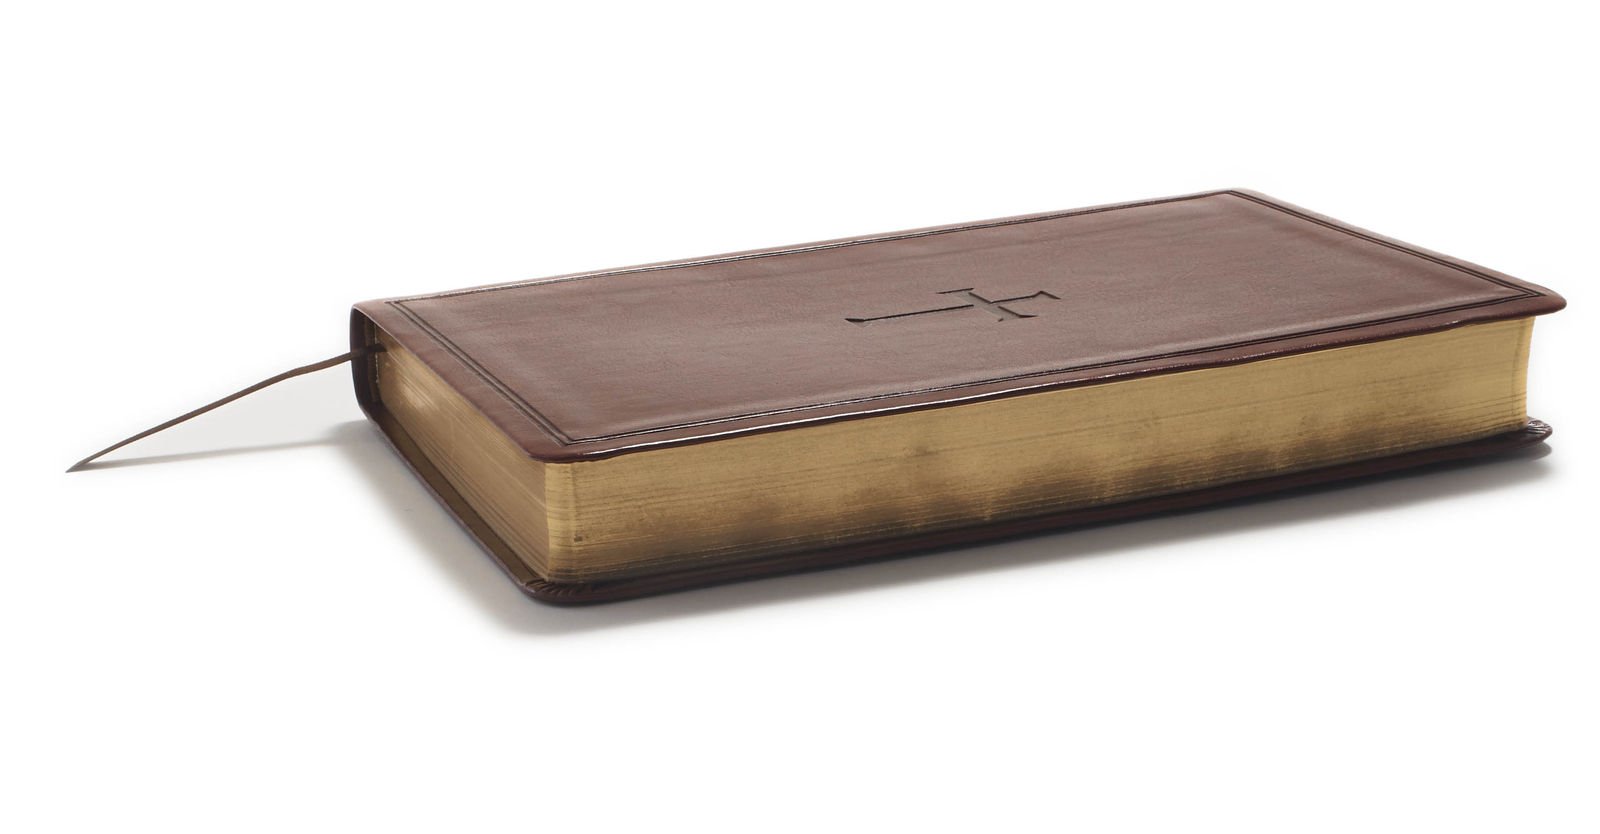 KJV Ultrathin Reference Bible, Brown LeatherTouch